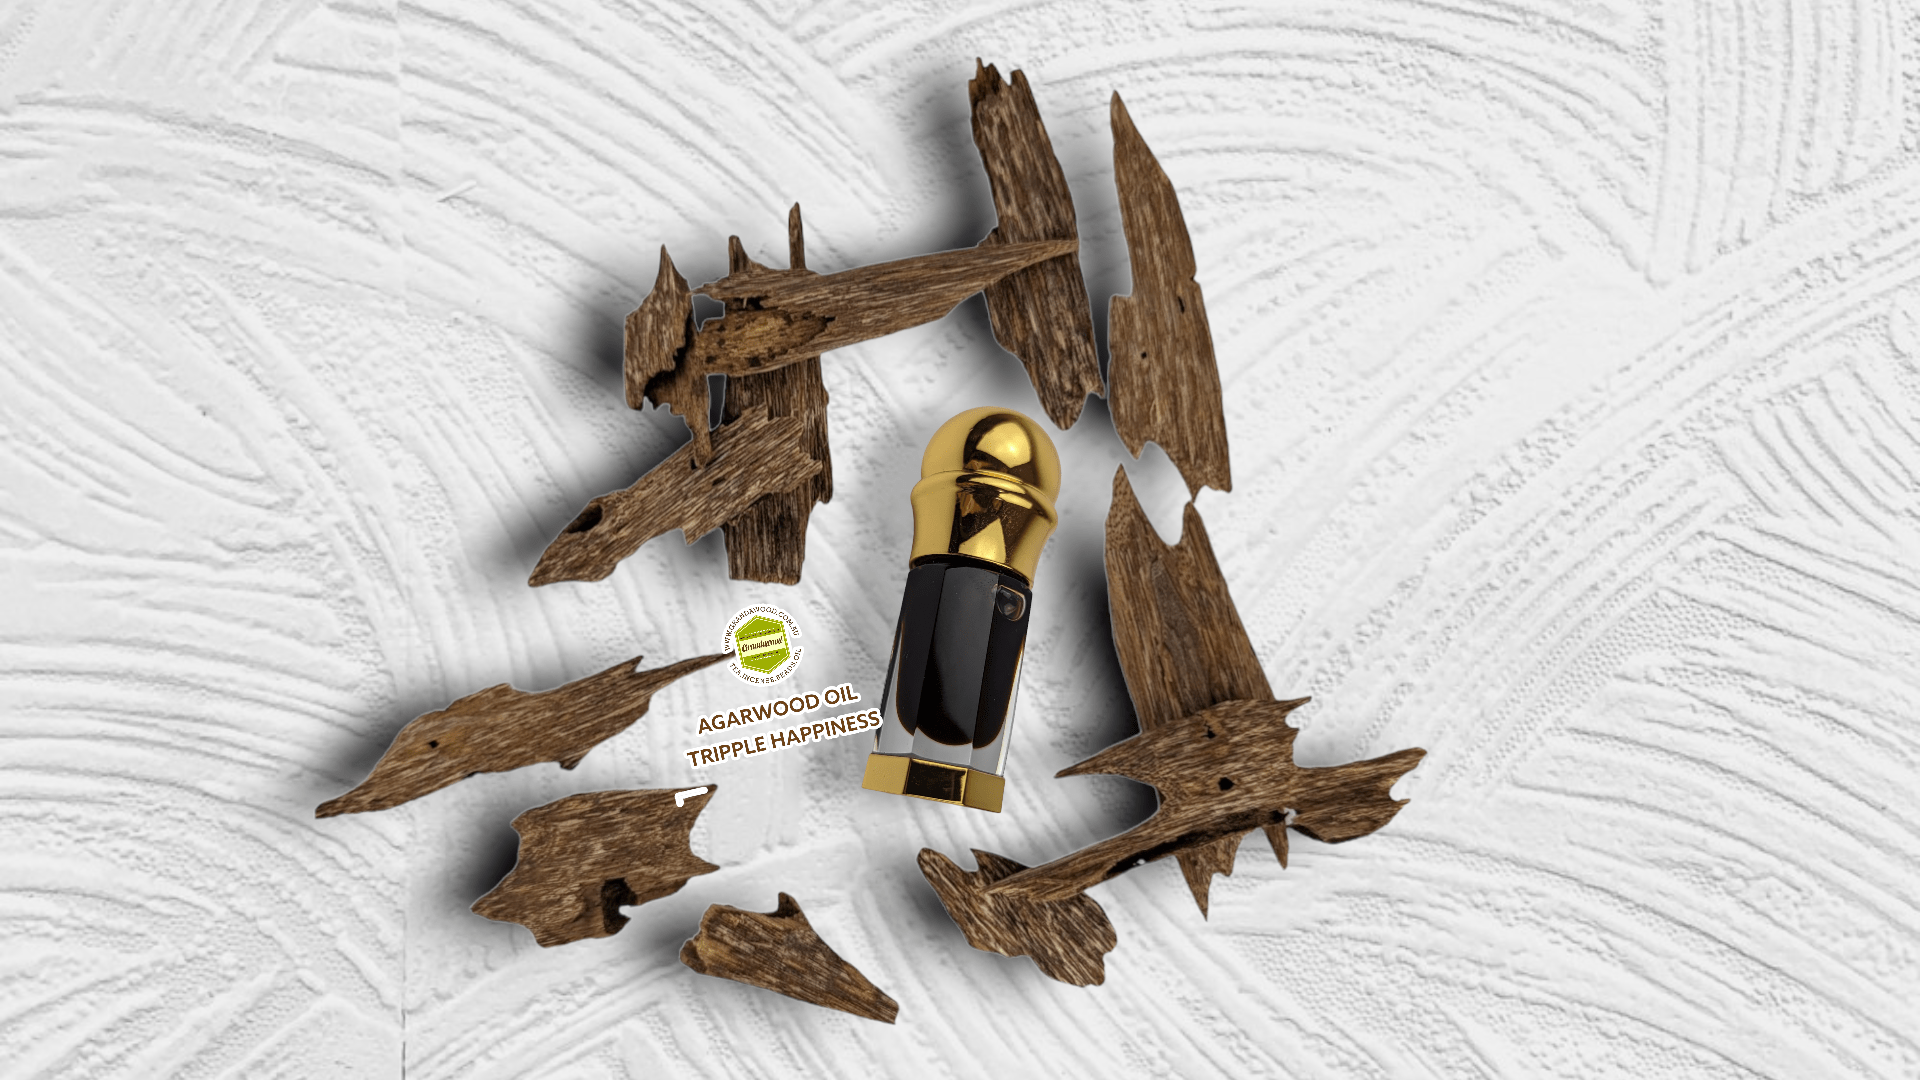 *New* The Heaven Smoke- 100% Pure Cutlivated Agarwood Oil (Oud)- Co2 Supercritical Fluid Extraction - Triple Happiness- Wild Agarwood / 3g